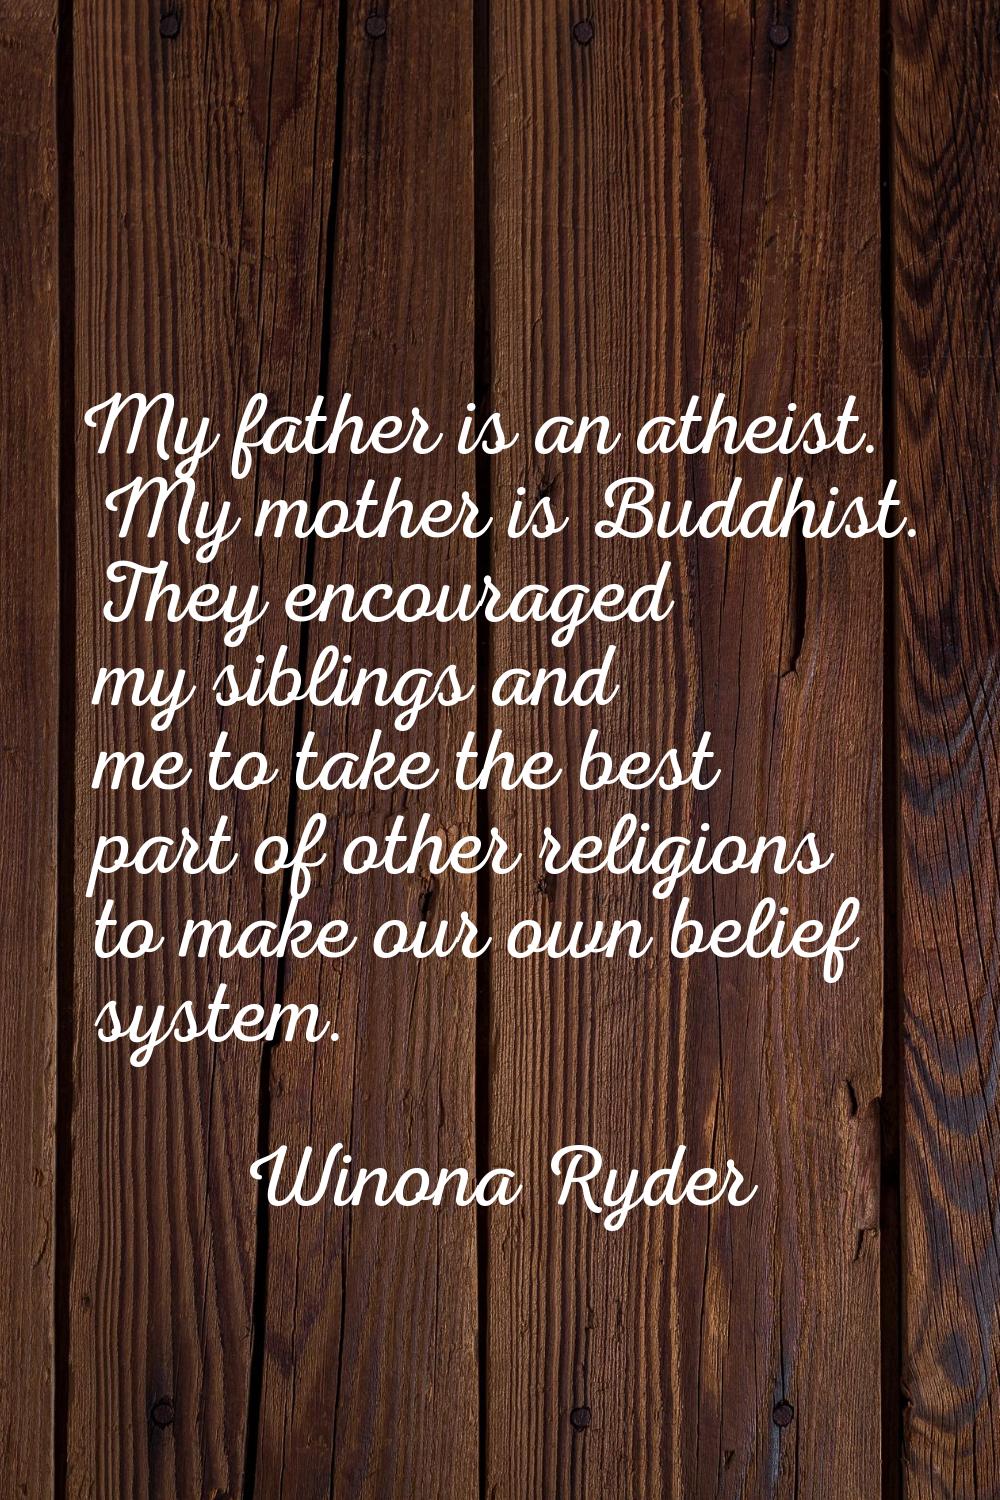 My father is an atheist. My mother is Buddhist. They encouraged my siblings and me to take the best